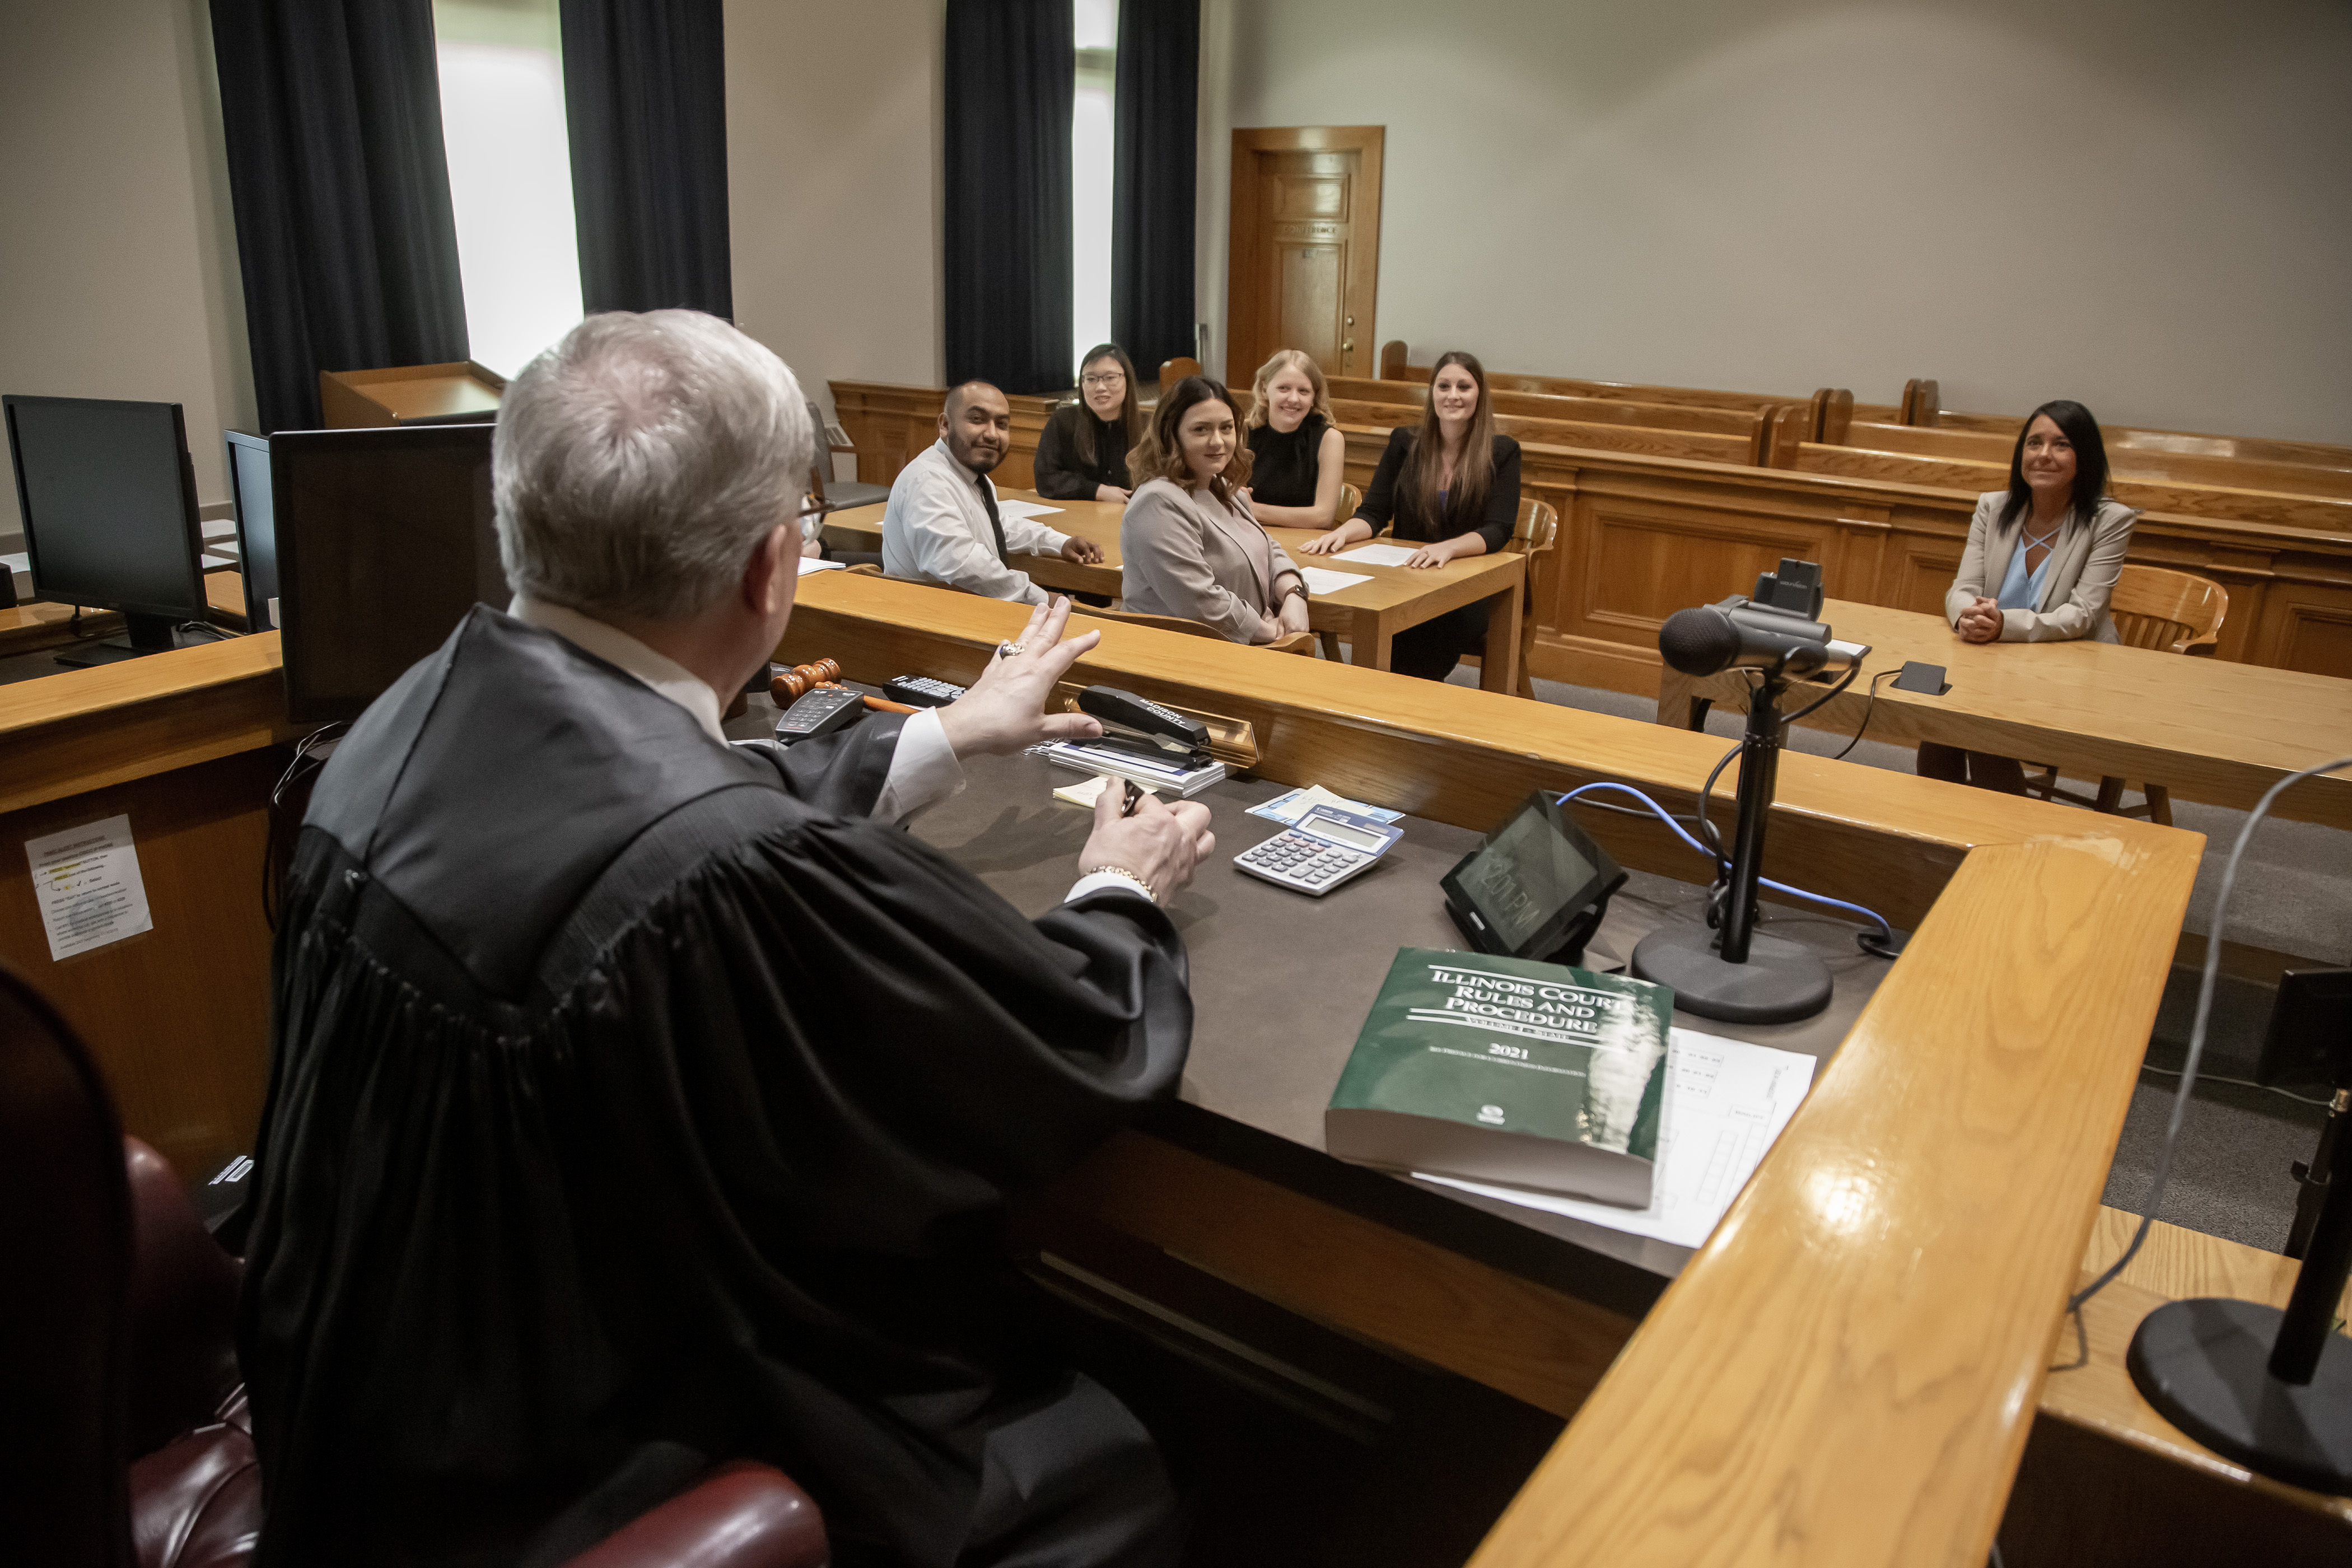 Circuit Judge Dennis Ruth meets with a group of L&C paralegal students in his Madison County courtroom. JAN DONA/L&C MARKETING & PR